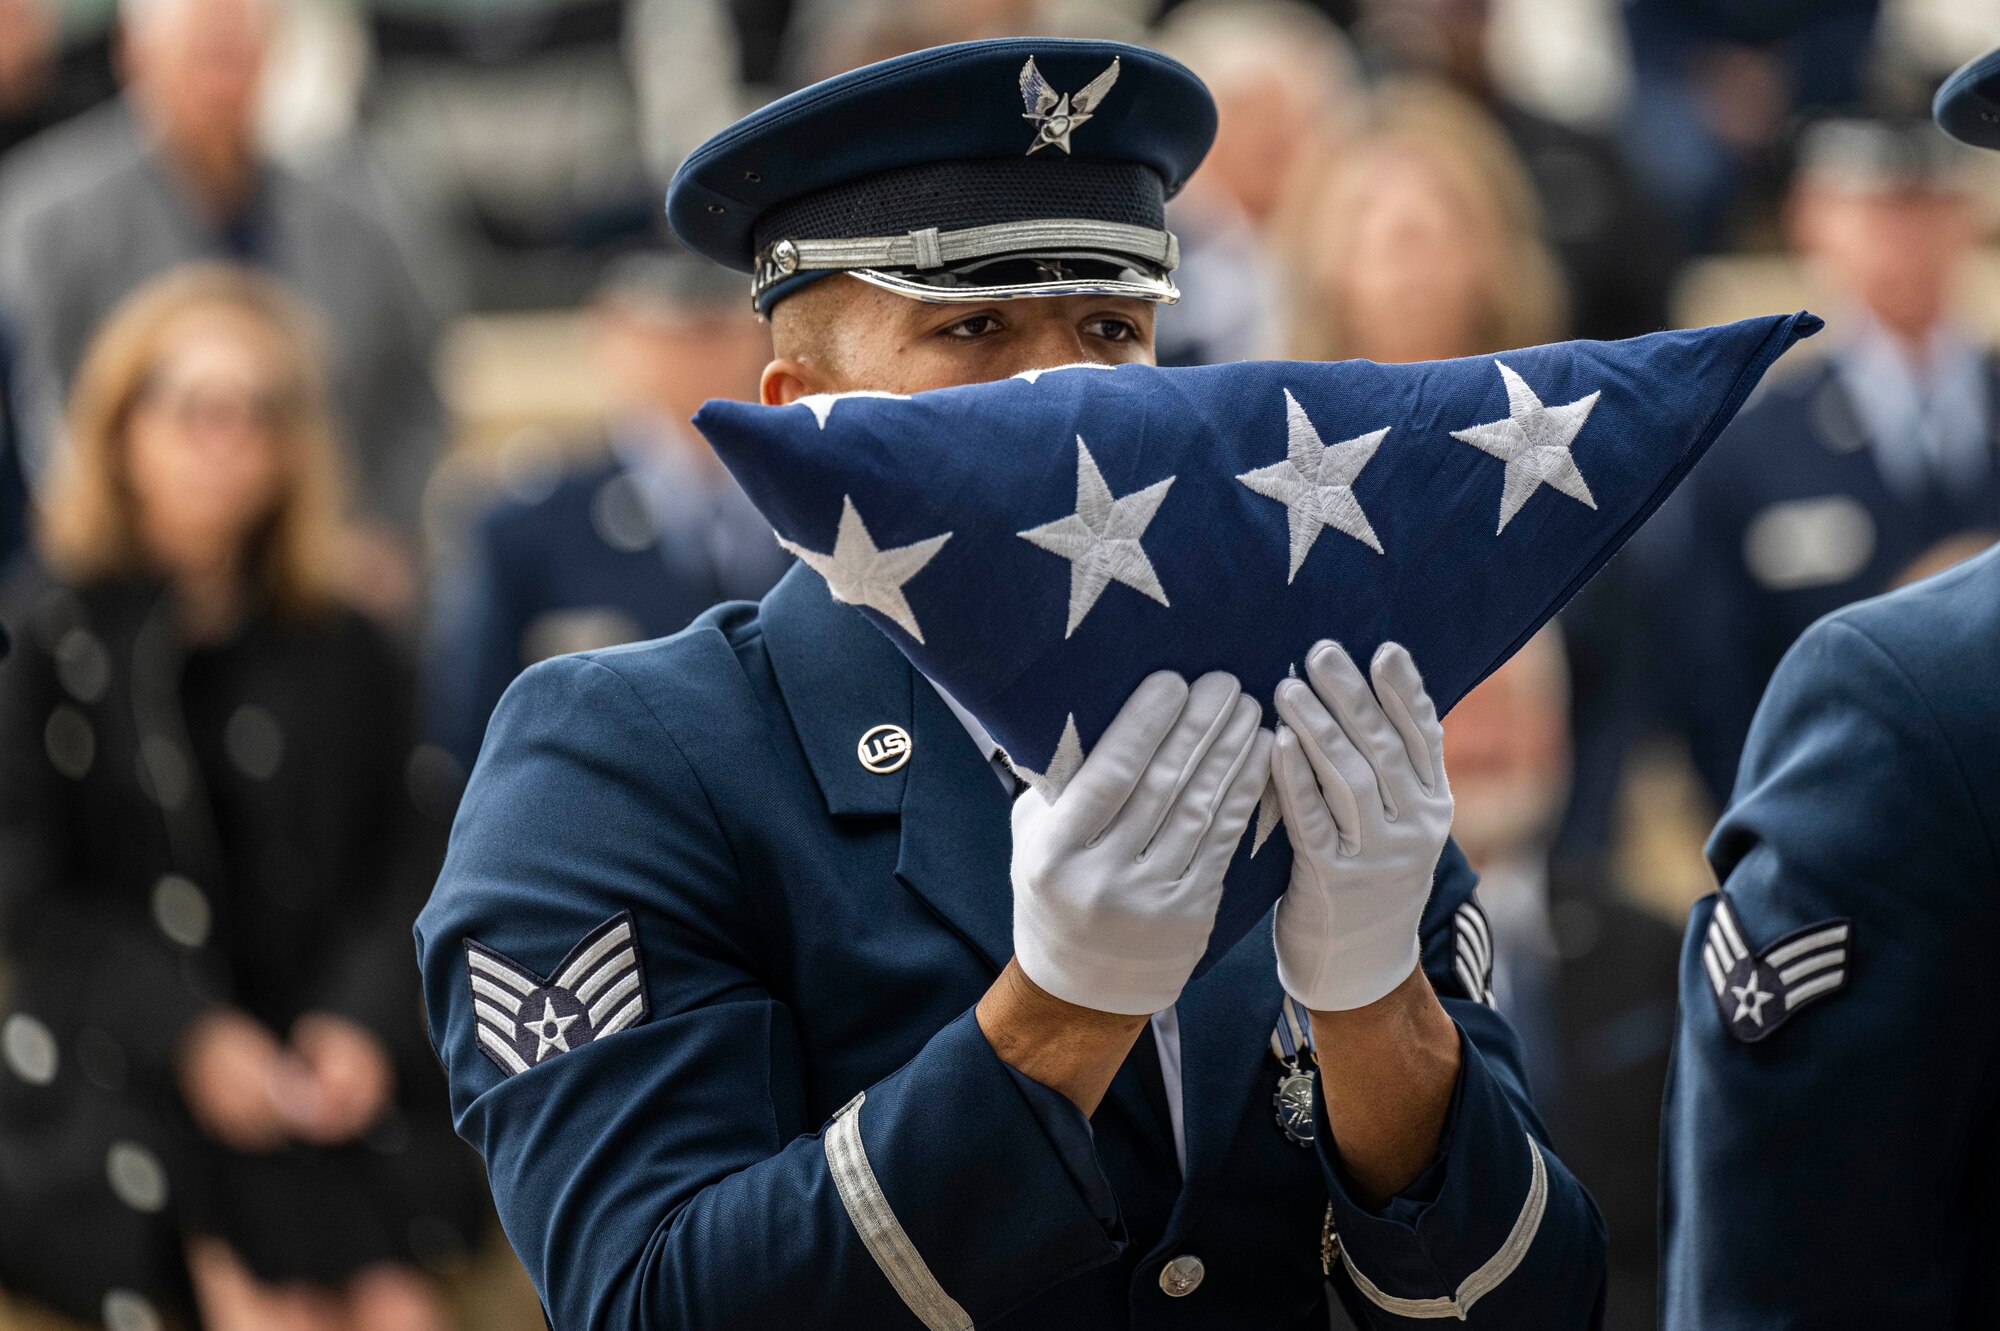 Members of the U.S. Air Force Honor Guard fold the U.S. flag during the interment with full military honors of the fifth Chief Master Sgt. of the Air Force Robert D. Gaylor, Feb. 10, 2024 at Fort Sam Houston National Cemetery, Texas. Gaylor championed Air Force professional military education in the 1960s and 1970s before he was promoted to Chief Master Sgt. of the Air Force in 1977. He continued to educate and inspire service members for more than 40 years after his retirement from military service. (U.S. Air Force photo by Tristin English).